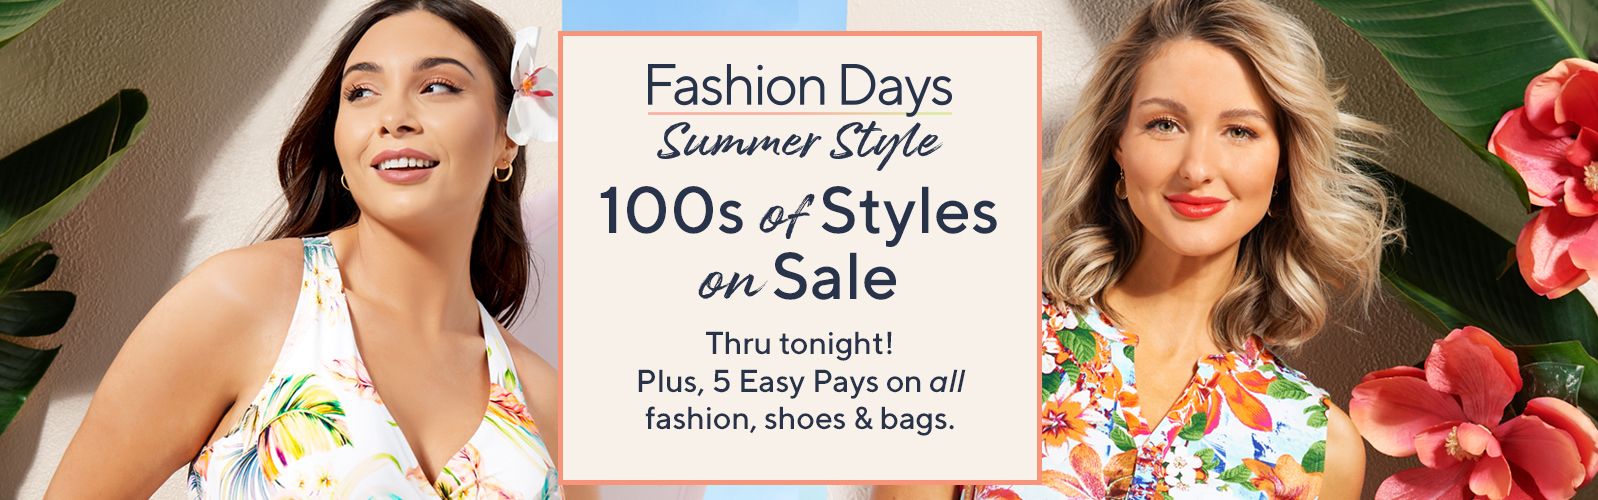 Fashion Days: Summer Style - 100s of Styles on Sale Thru tonight! Plus, 5 Easy Pays on all fashion, shoes & bags.